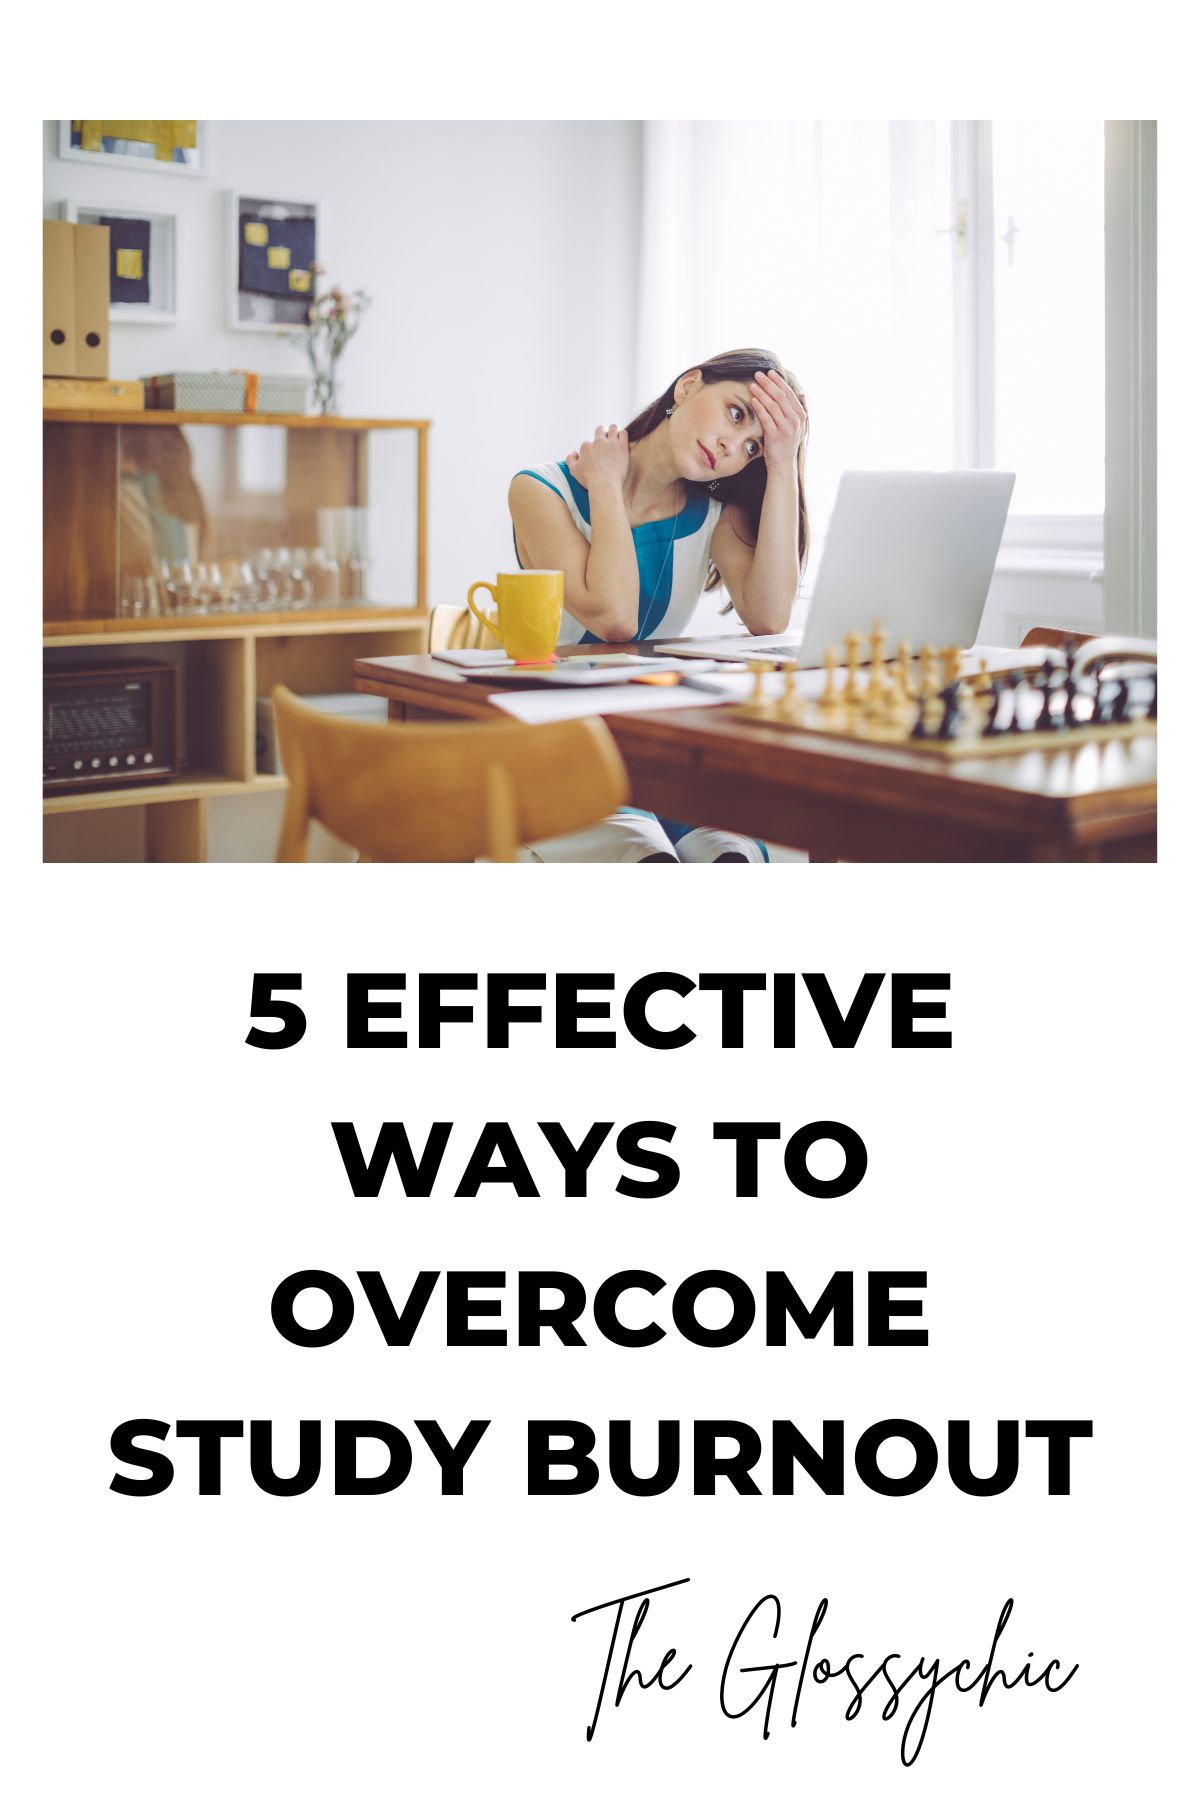 Effective Ways to Overcome Study burnout